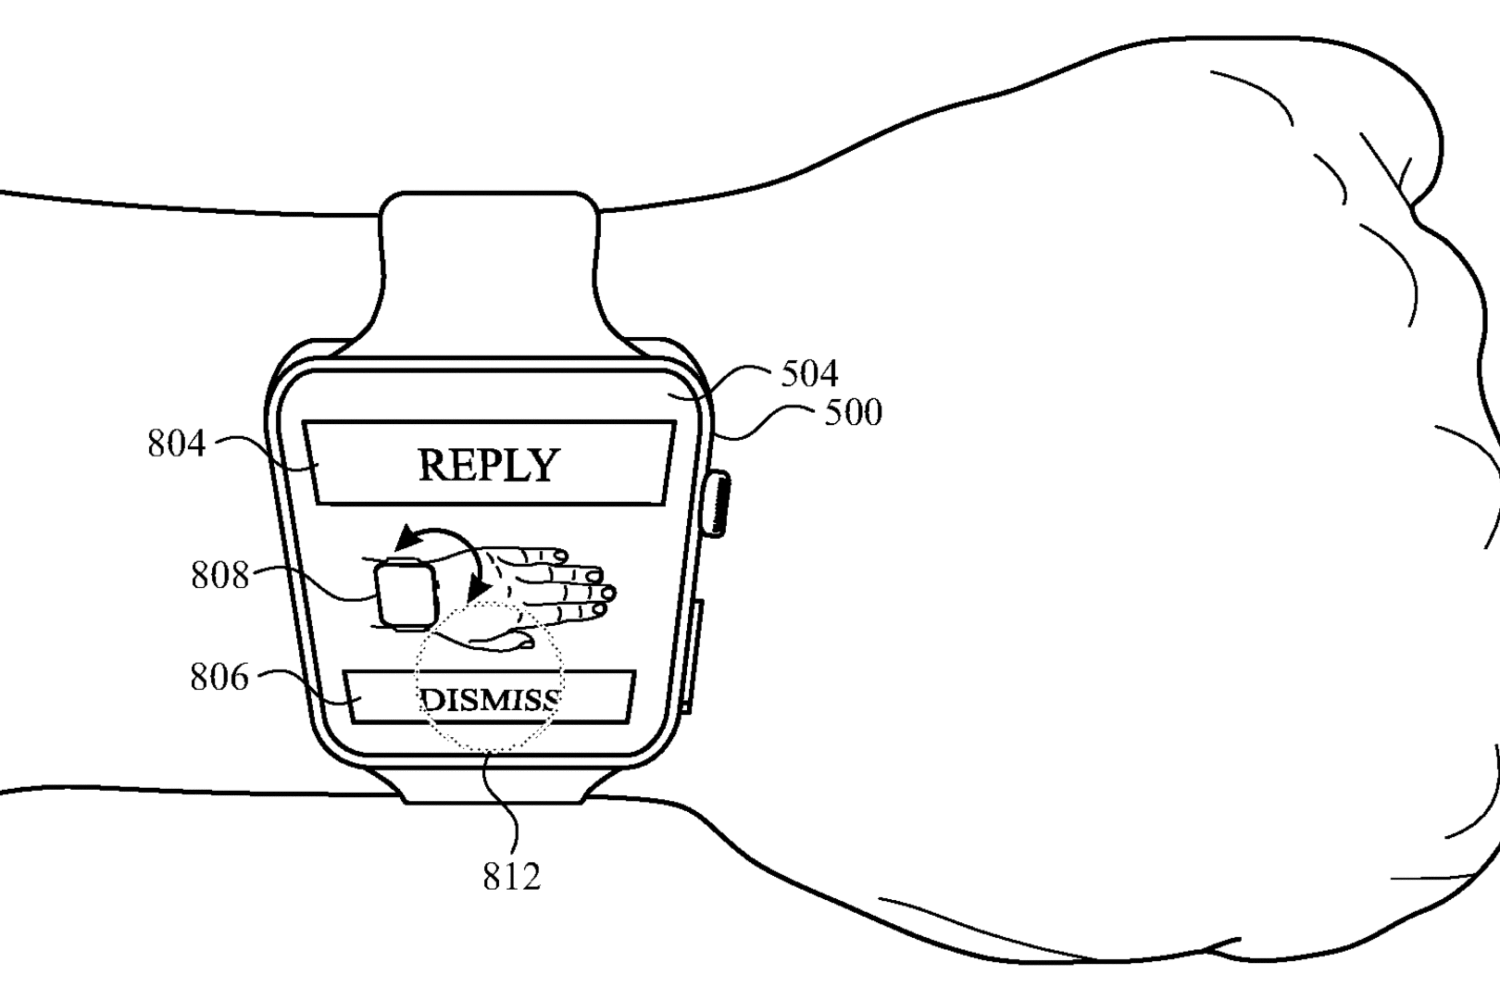 Patent drawing illustrating a male wrist rotating, with the fist clinched, to deny an incoming call on a smartwatch